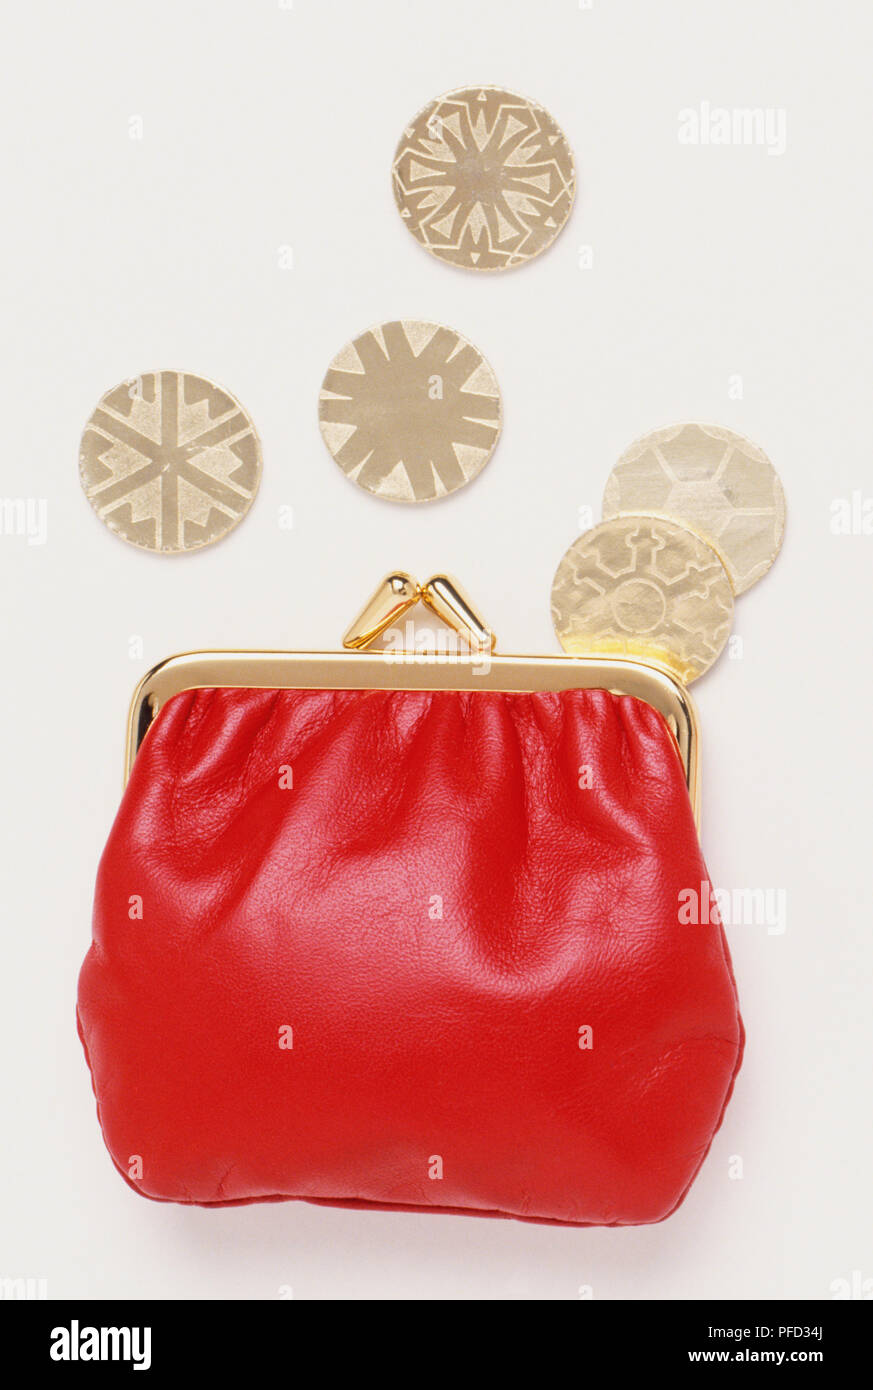 Red leather clasp purse and five toy coins, close up Stock Photo